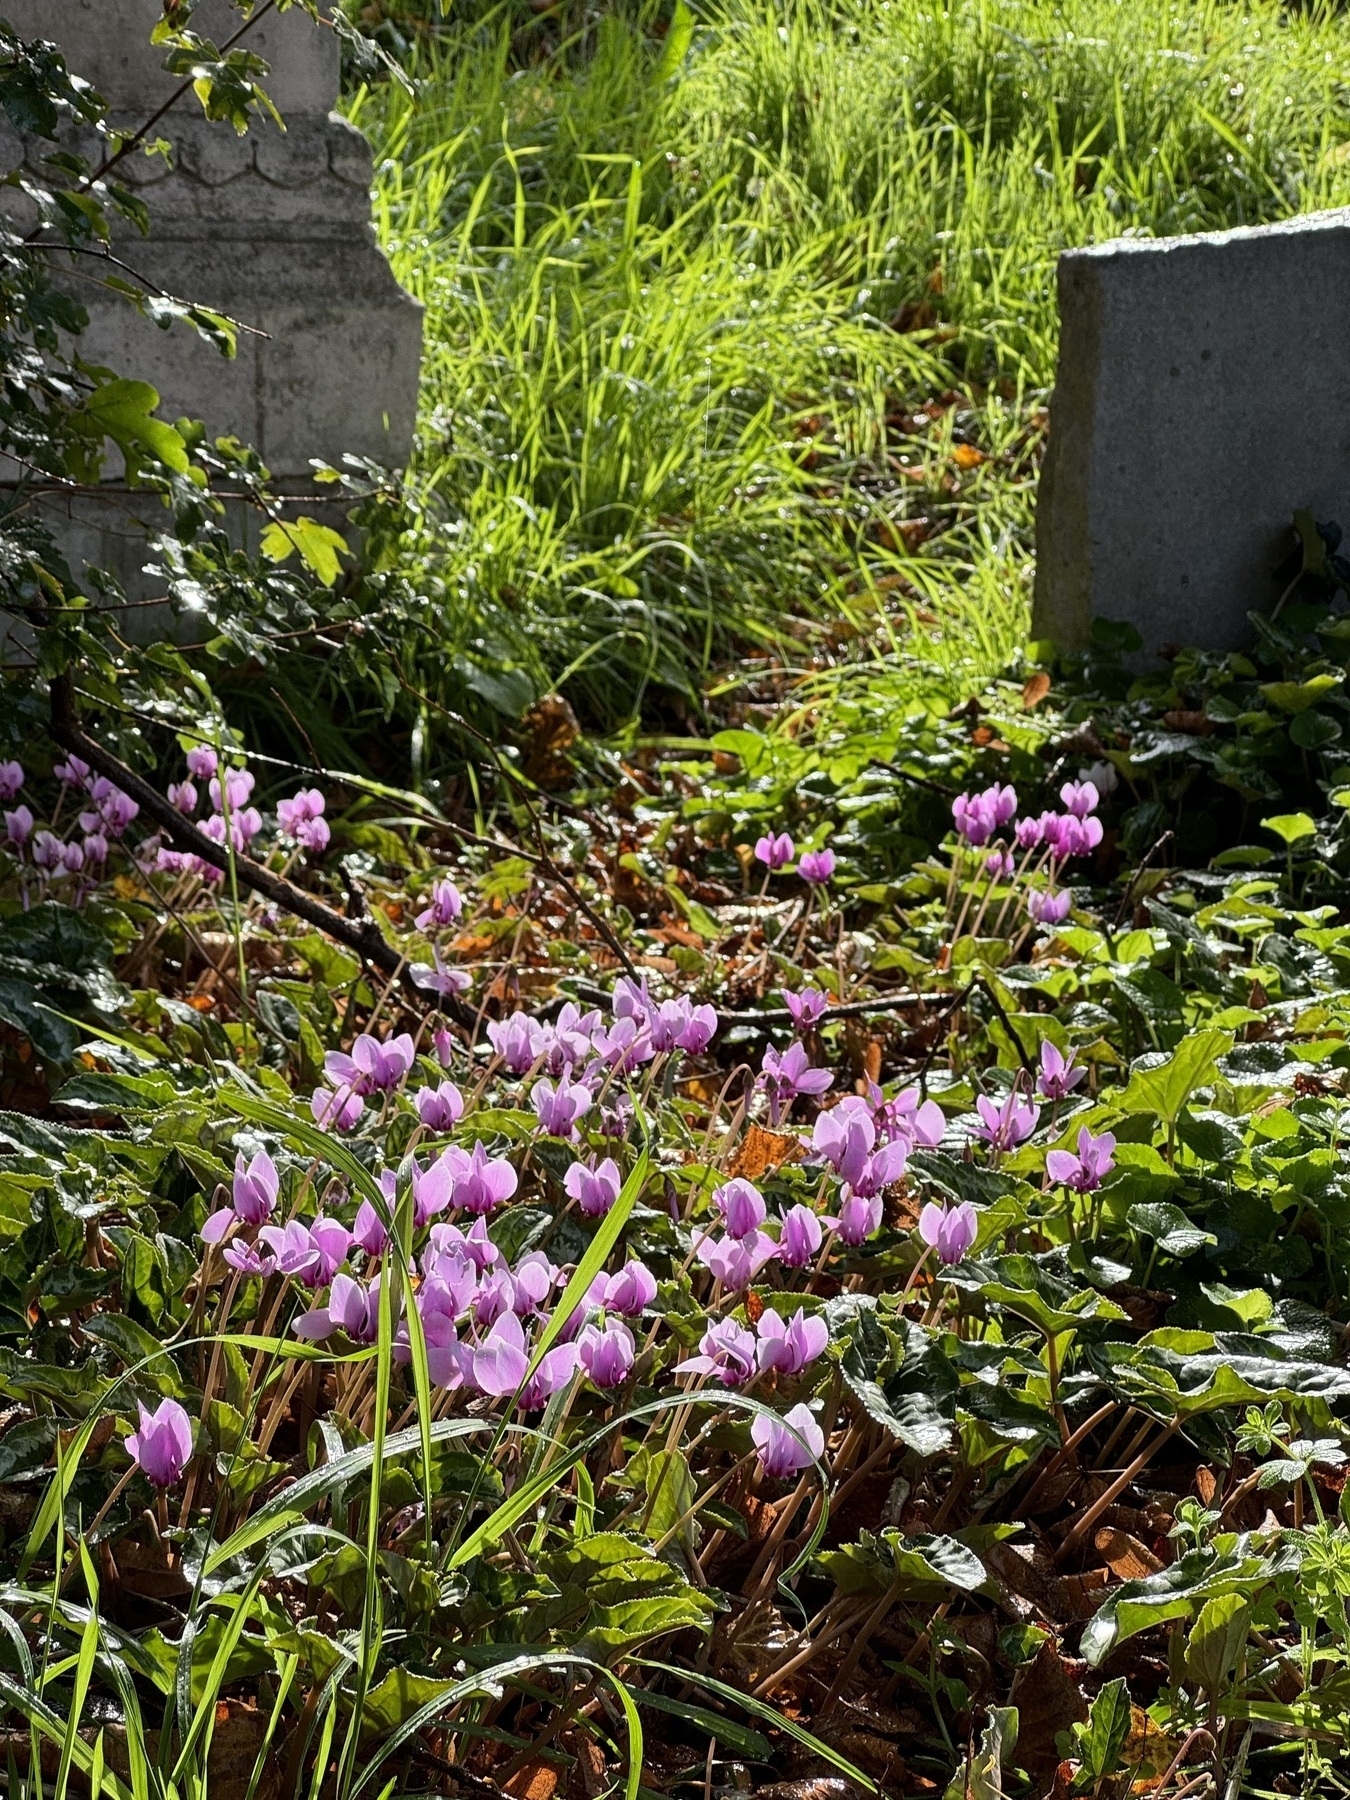 Some purple sowbread flowering in a graveyard in the sun.